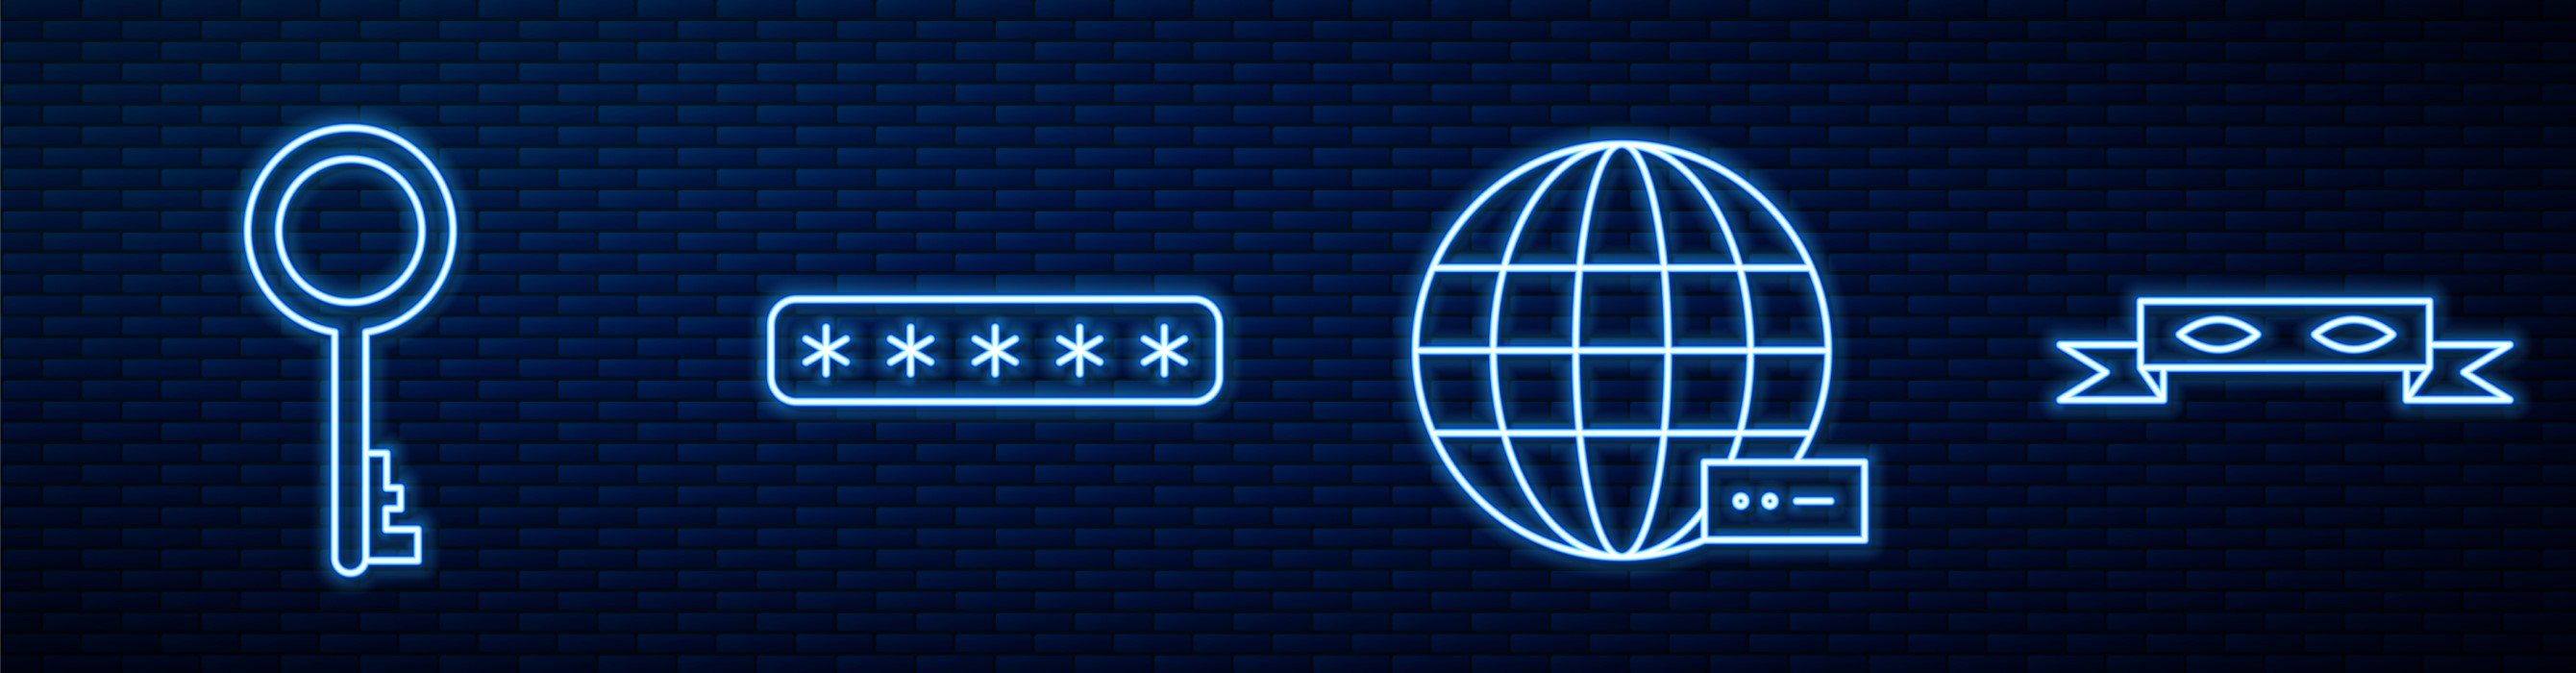 Glowing line of icons on brick wall_social network, old key, password protection, and thief eye mask [1267486911]-2